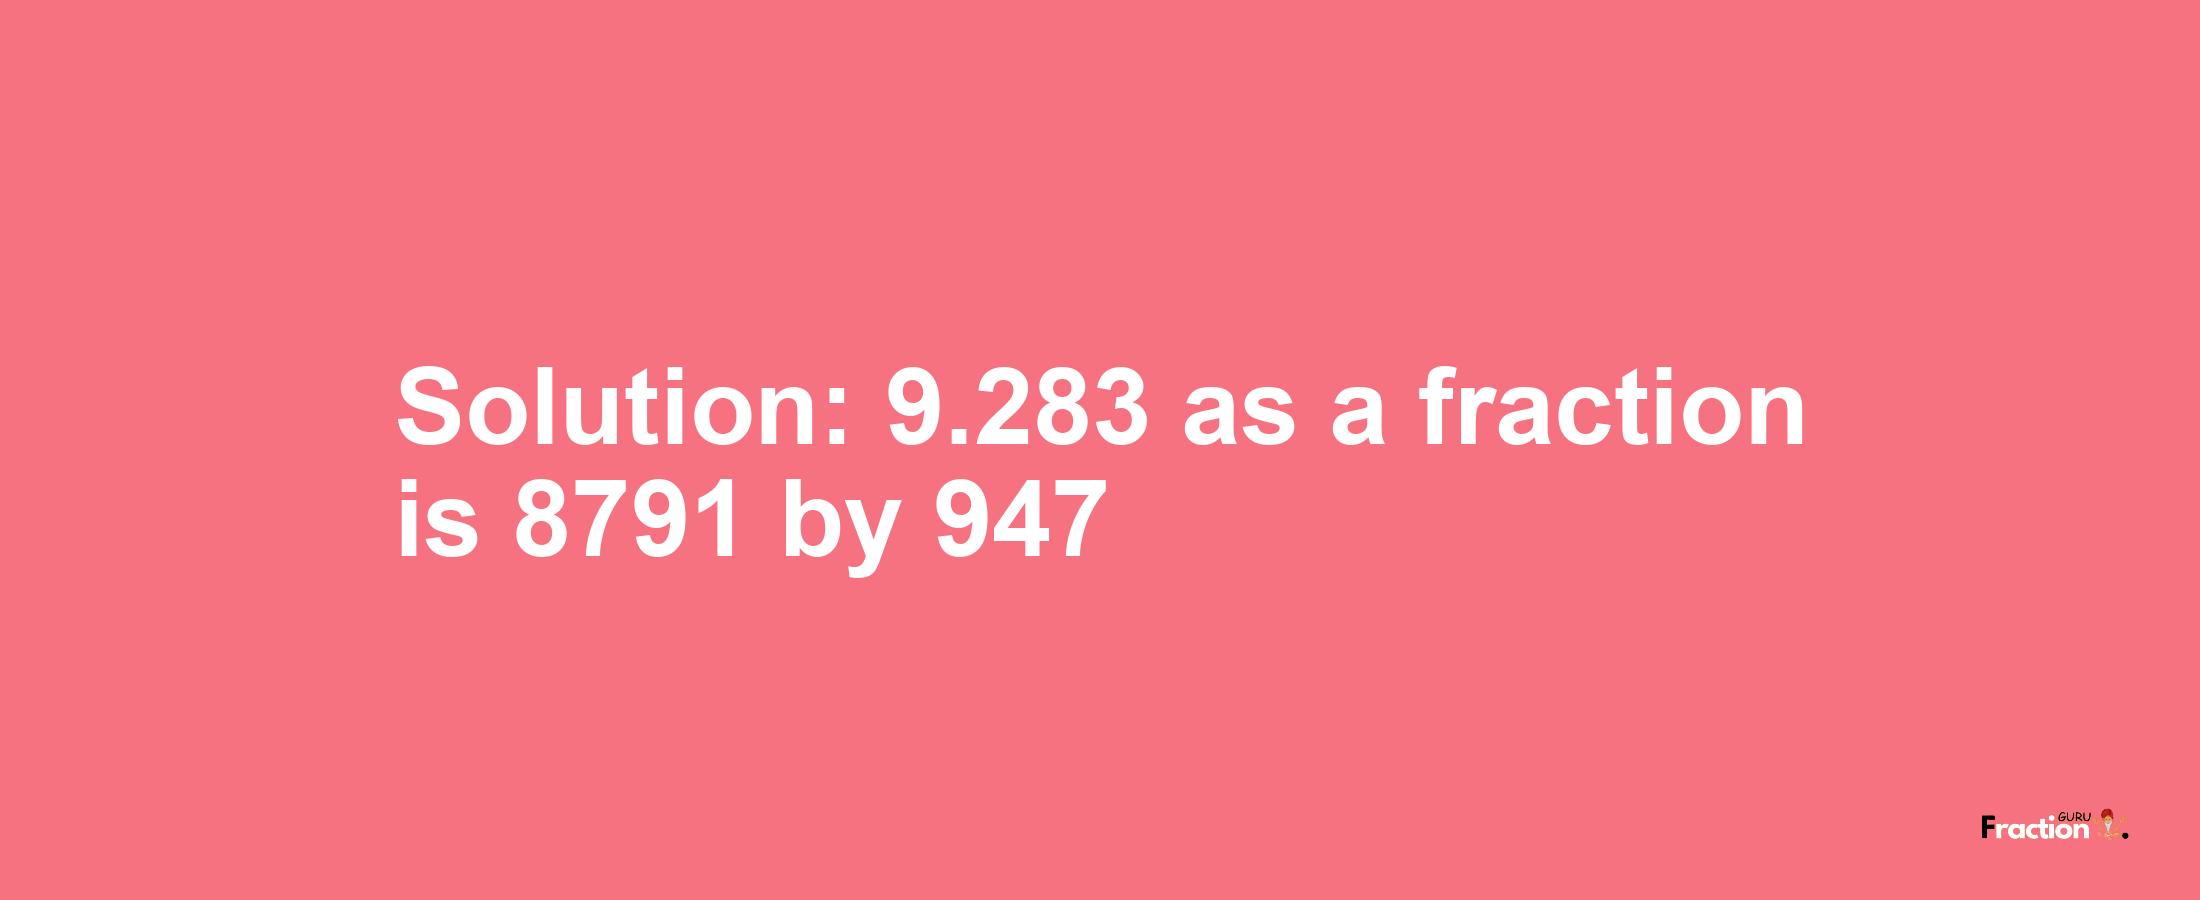 Solution:9.283 as a fraction is 8791/947